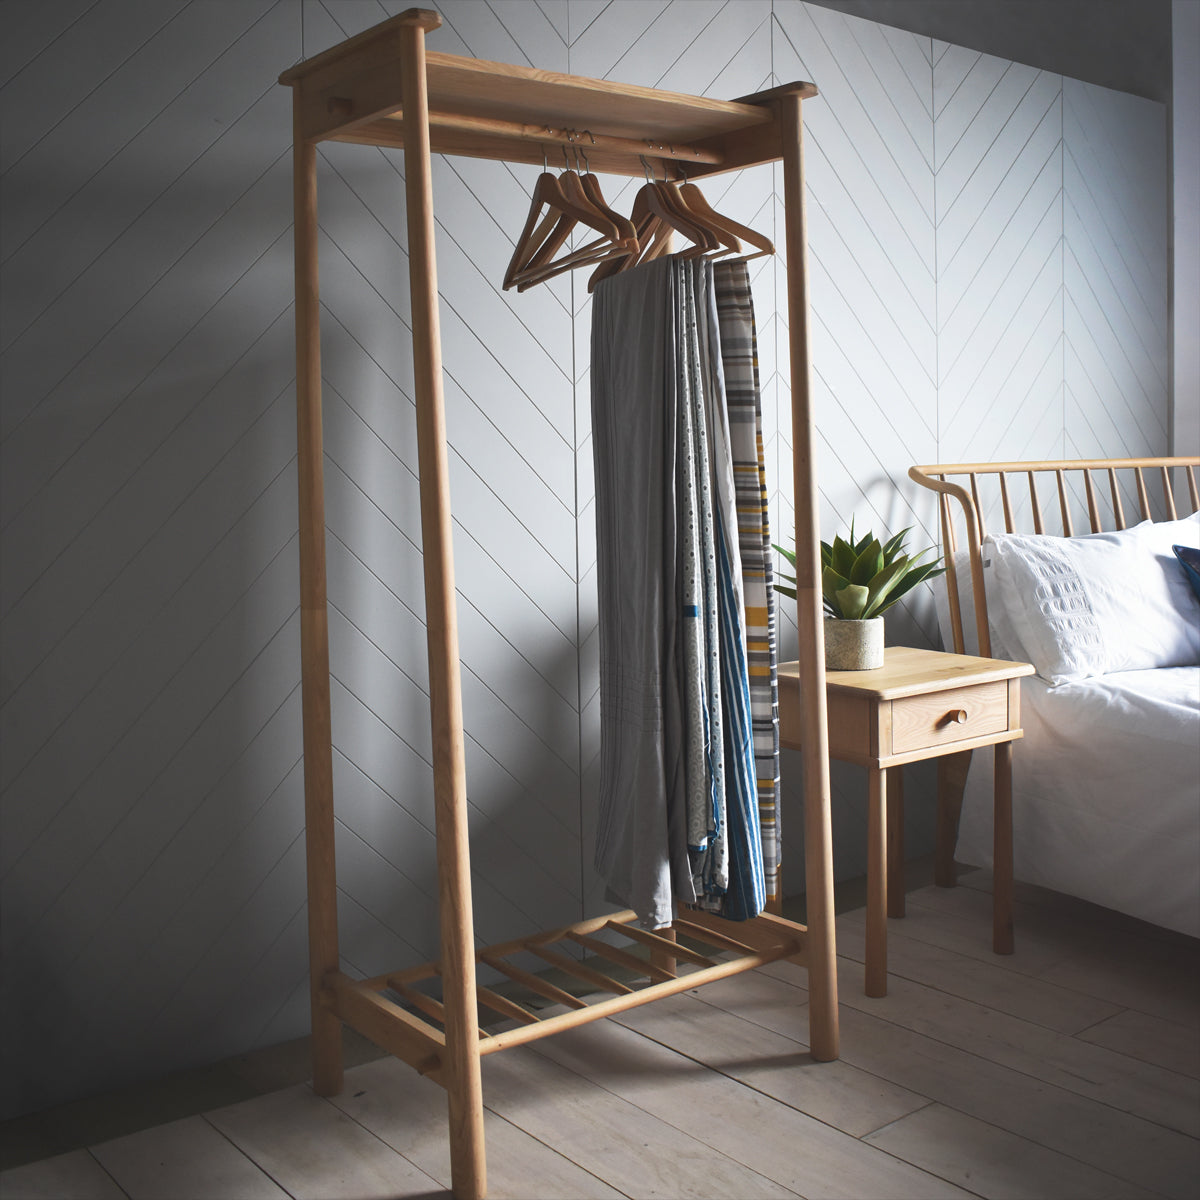 A home furniture piece, the Tigley Open Wardrobe from Kikiathome.co.uk, enhances the interior decor of a bedroom with a bed.